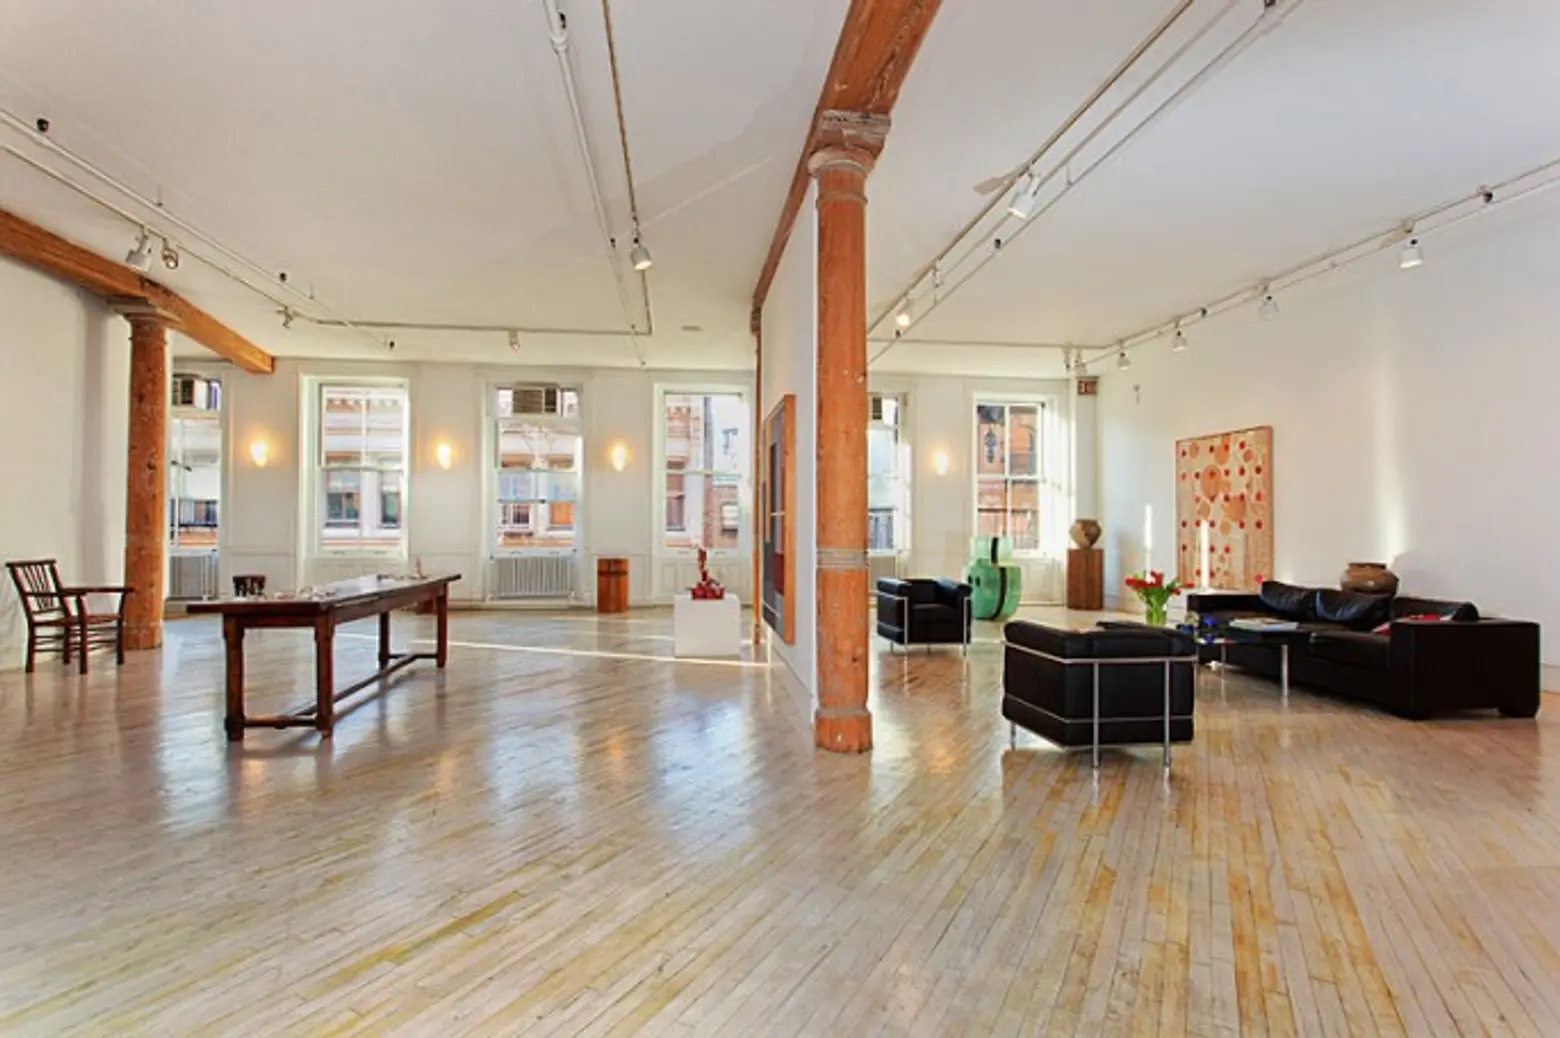 Art Collector Sells Massive SoHo Simplex for $4.5 Million to Reportedly Pesky Neighbors